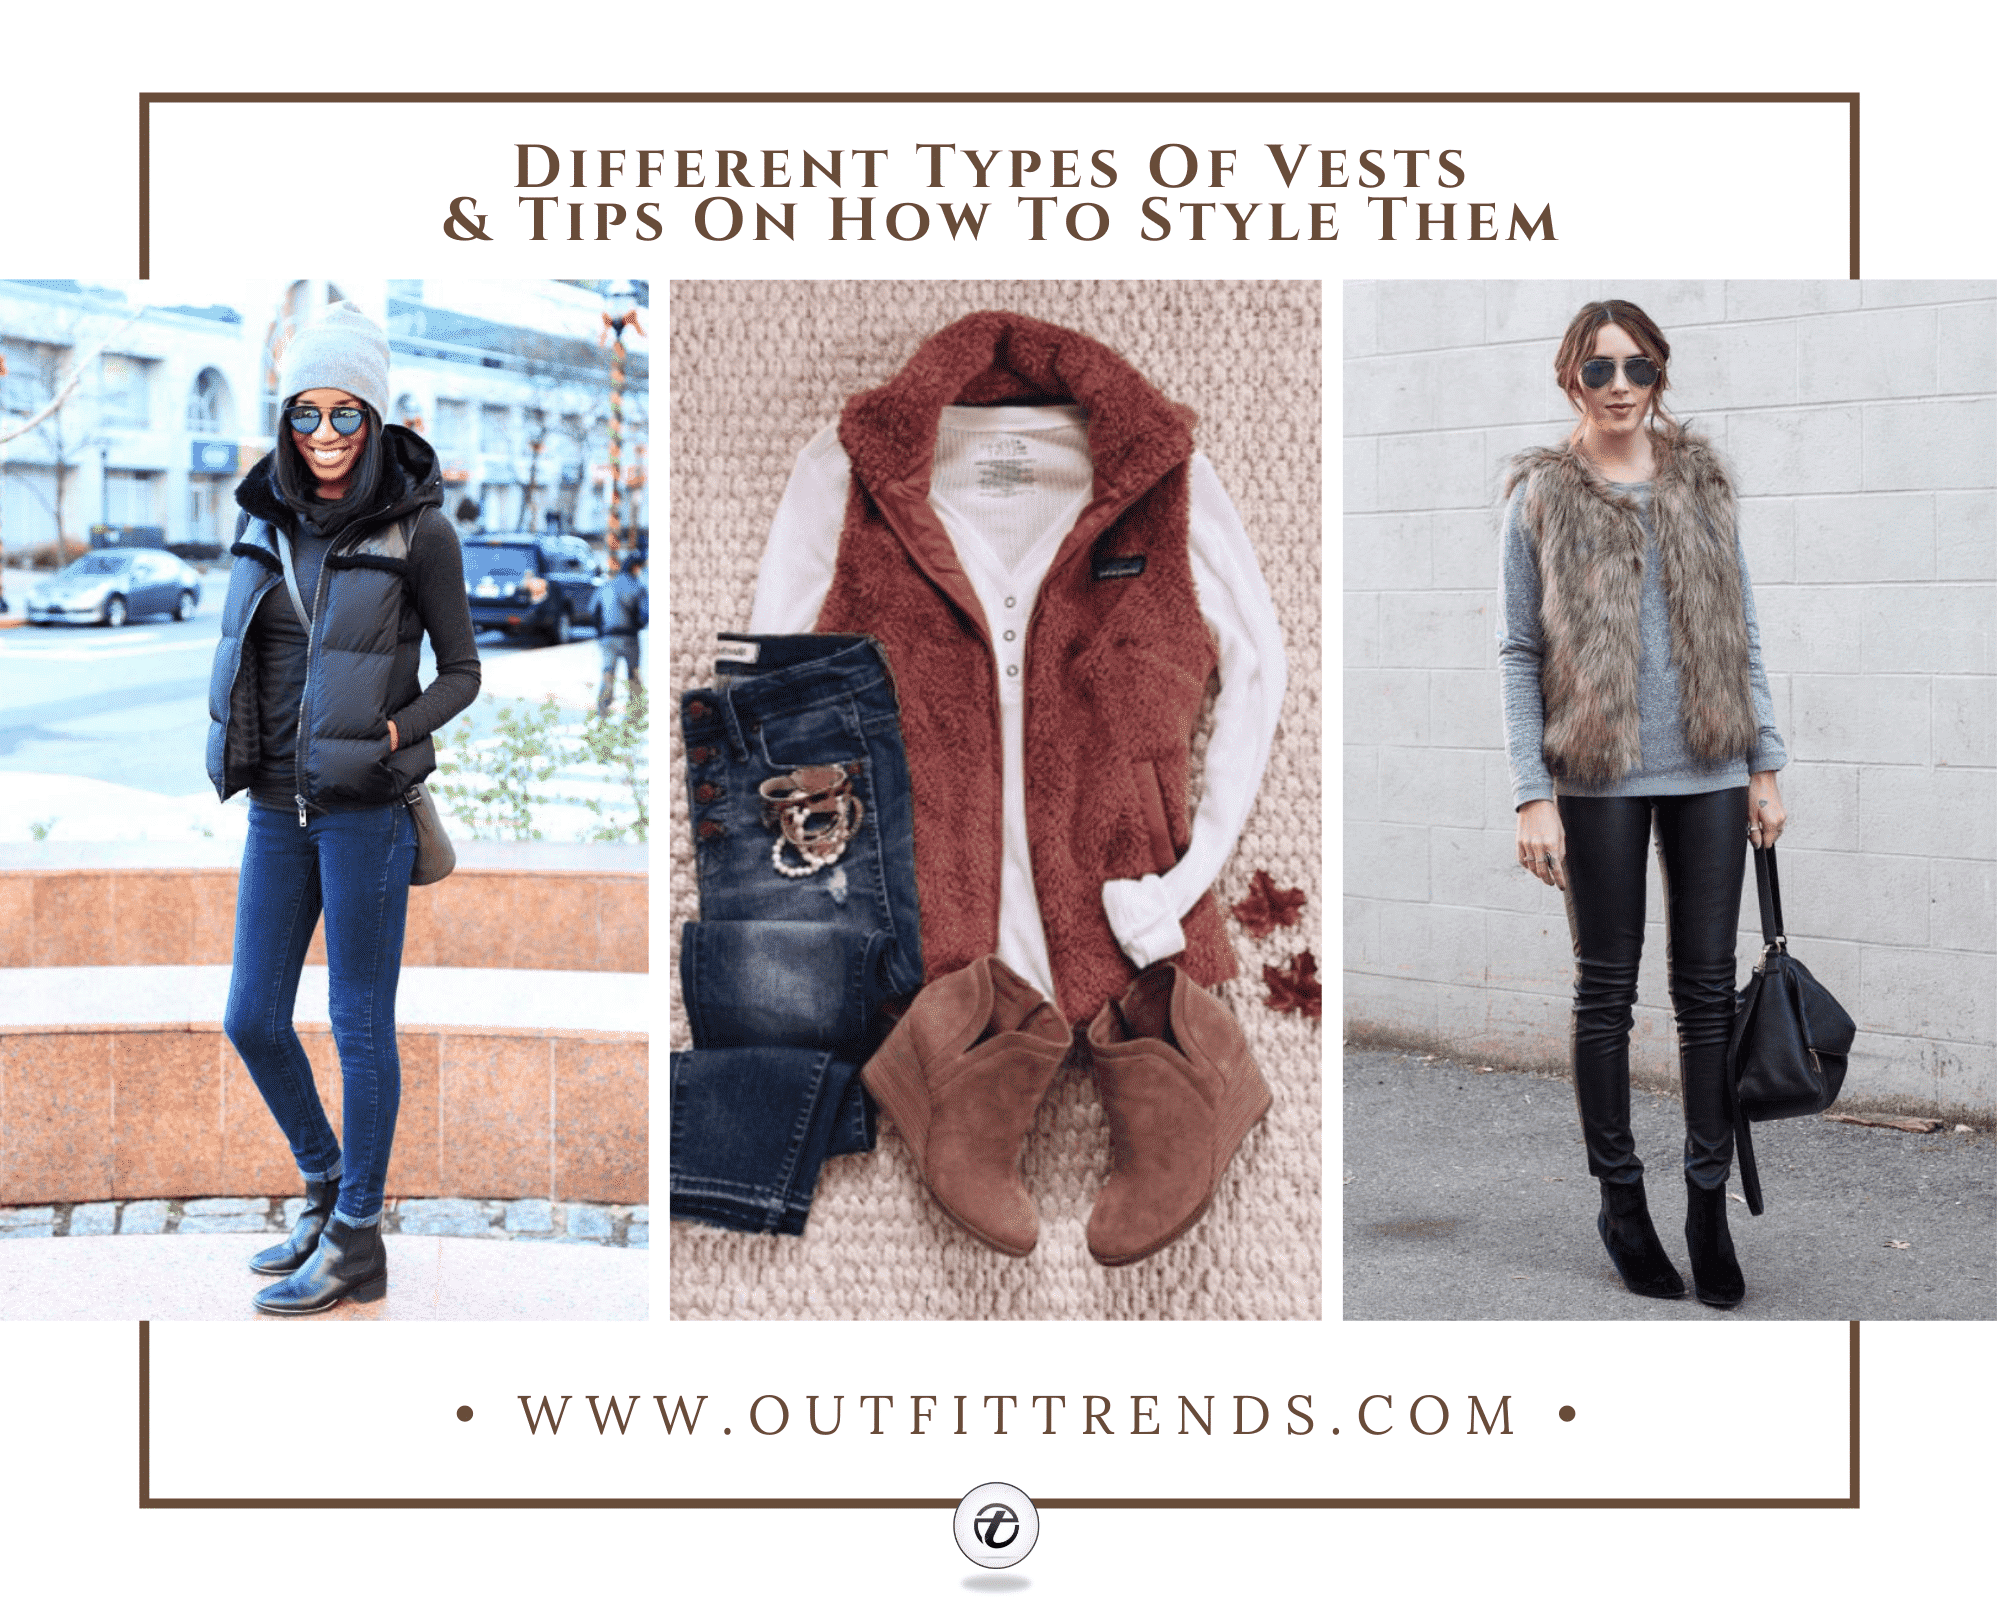 8 Ways to Wear a Vest This Winter